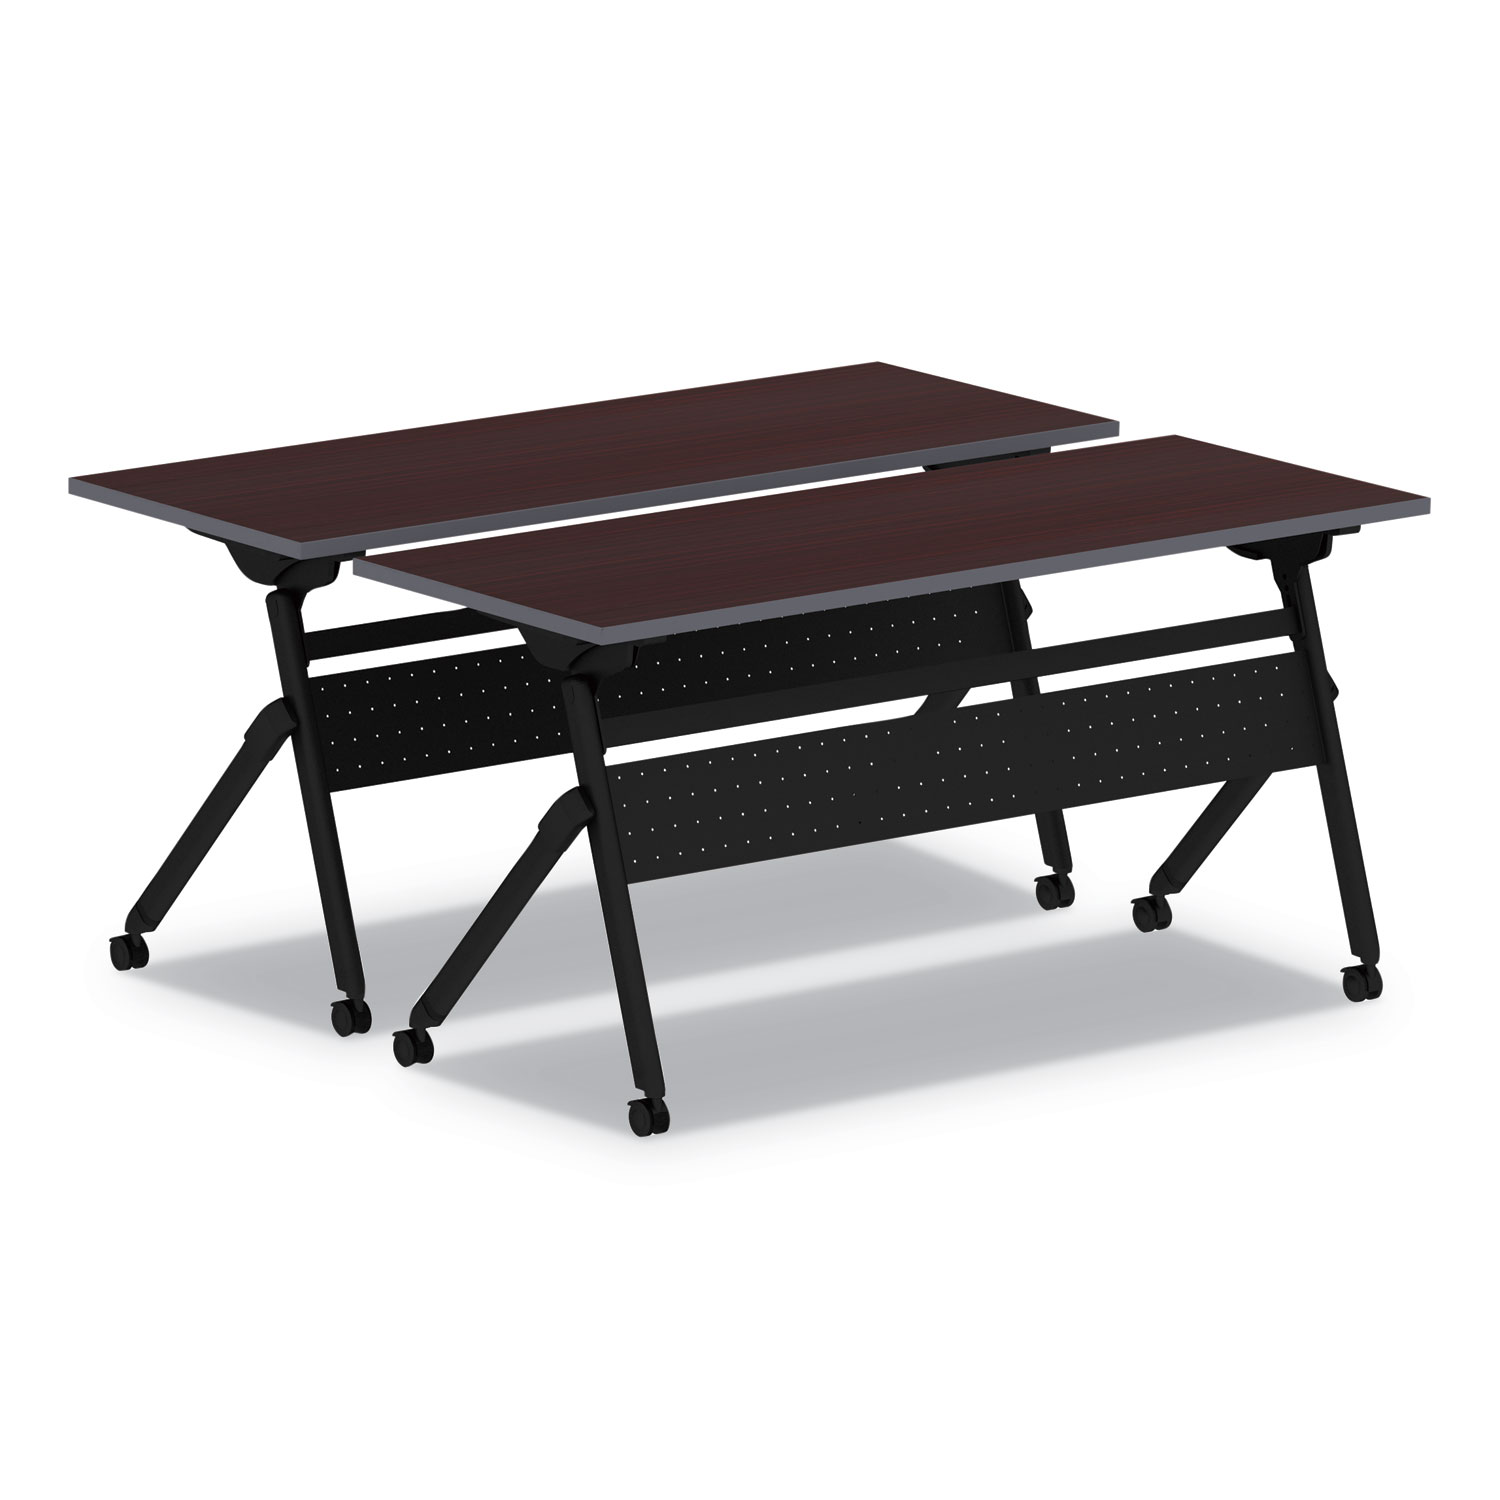 Flip and Nest Table Base, 58w x 28 3/8h, Black